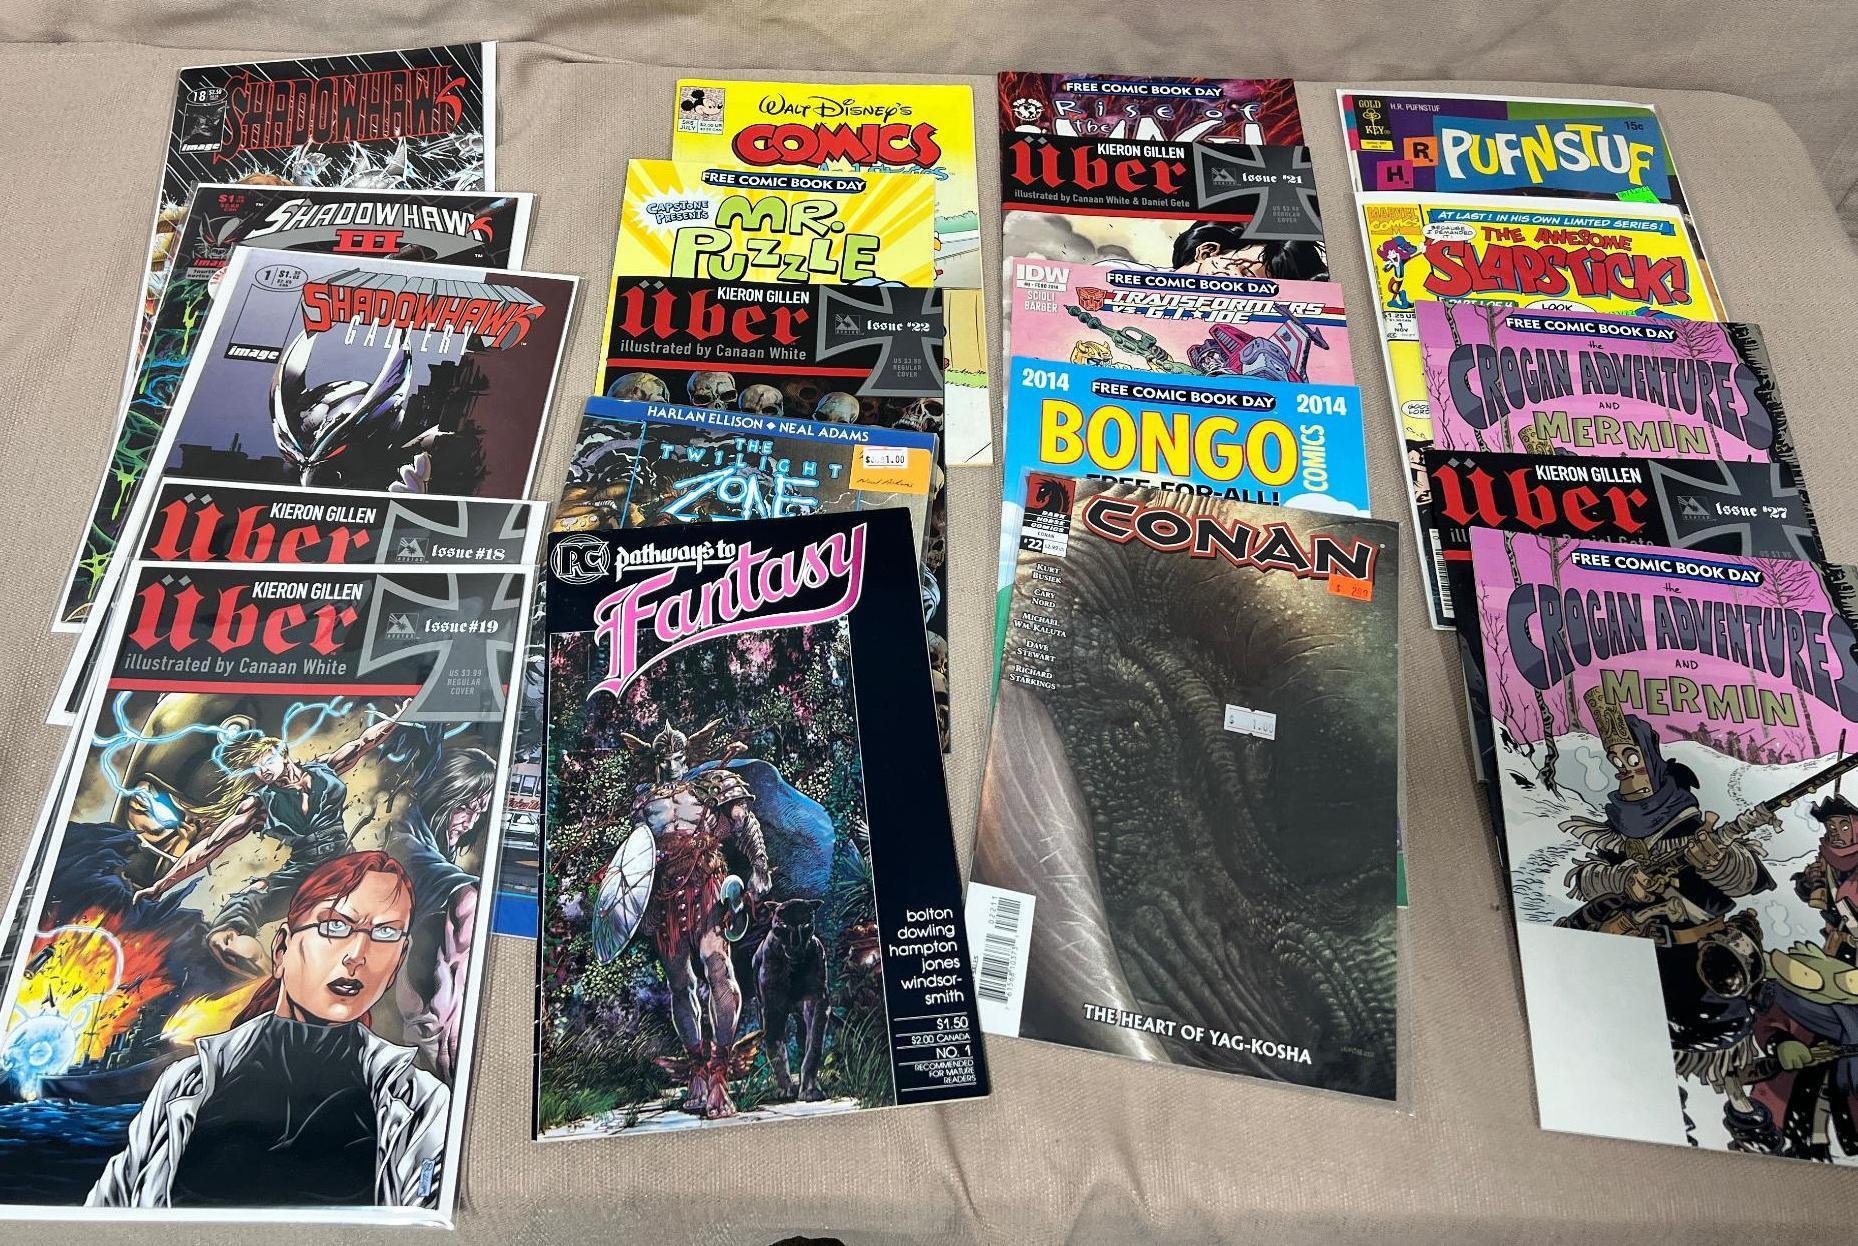 20 Asst. Comic Books, see pics for comics included